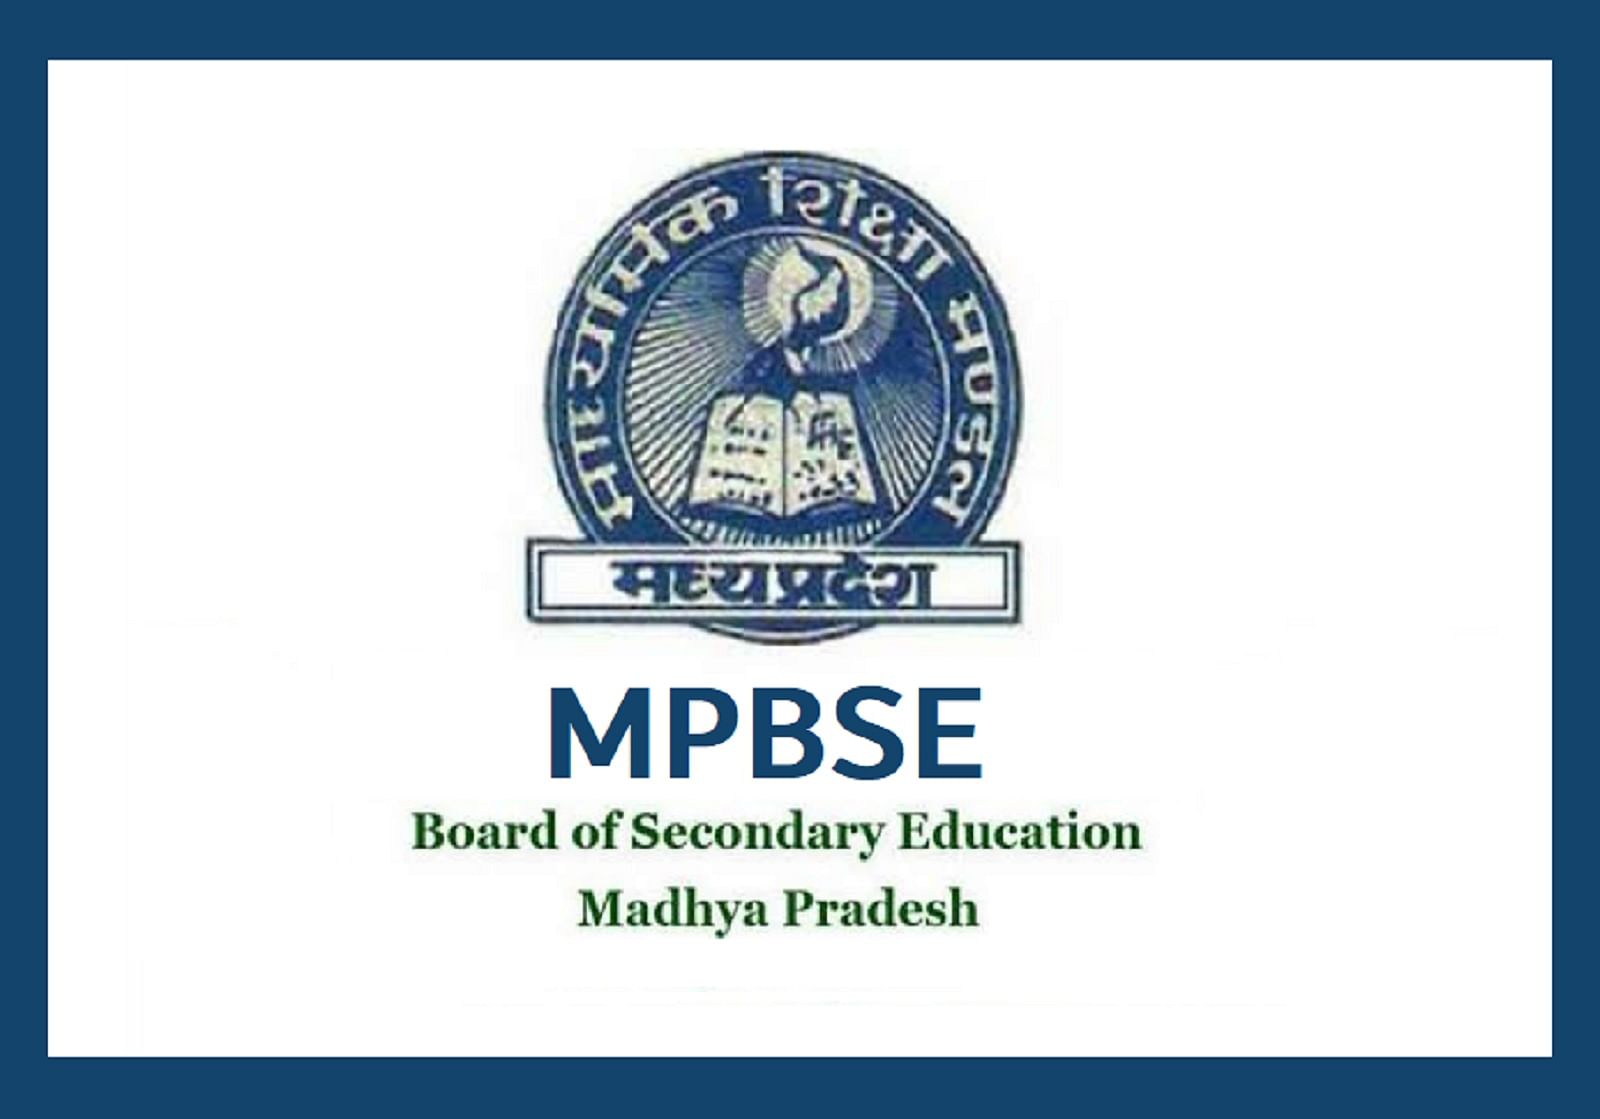 MP Board Exam 2022 Schedule for Class 10, 12 Students to Remain Unchanged: MP Education Minister Parmar